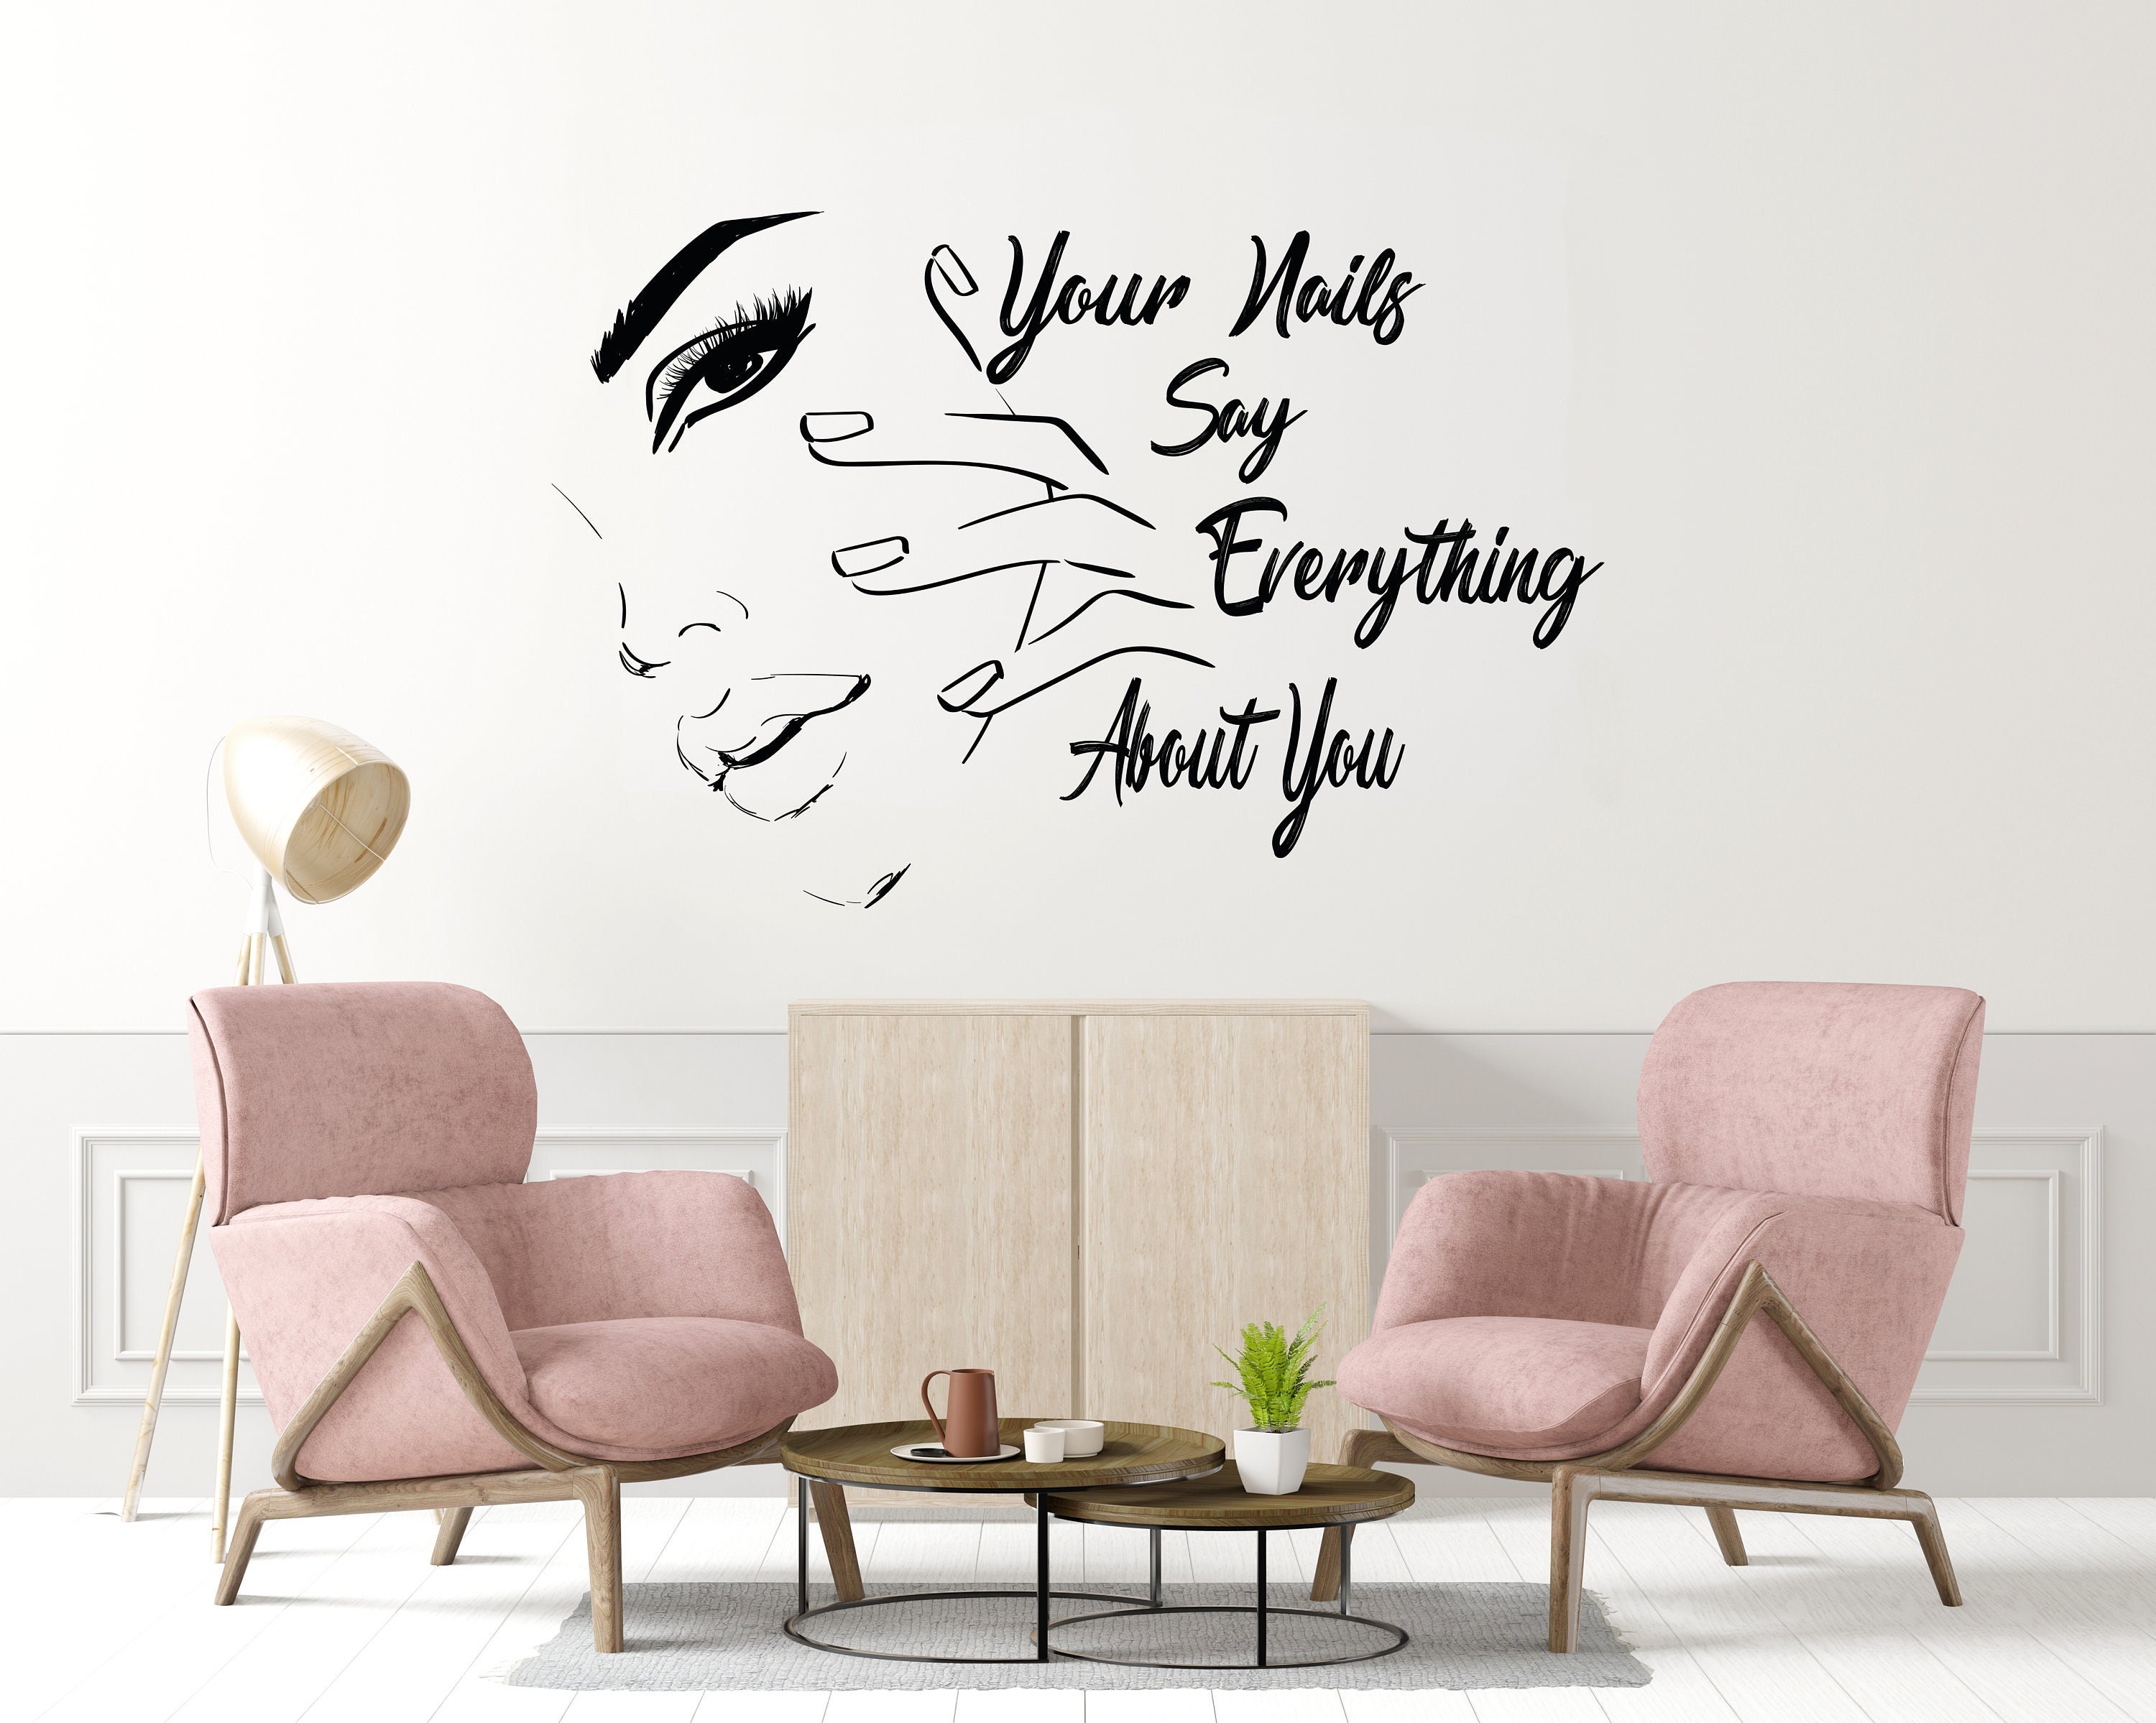 Wall Stickers Spa Nail Manicure Hair Salon Sticker Fashion Woman Eyelash  Studio Decal Vinyl Home Window Decor Removable 230822 From Piao10, $8.89 |  DHgate.Com